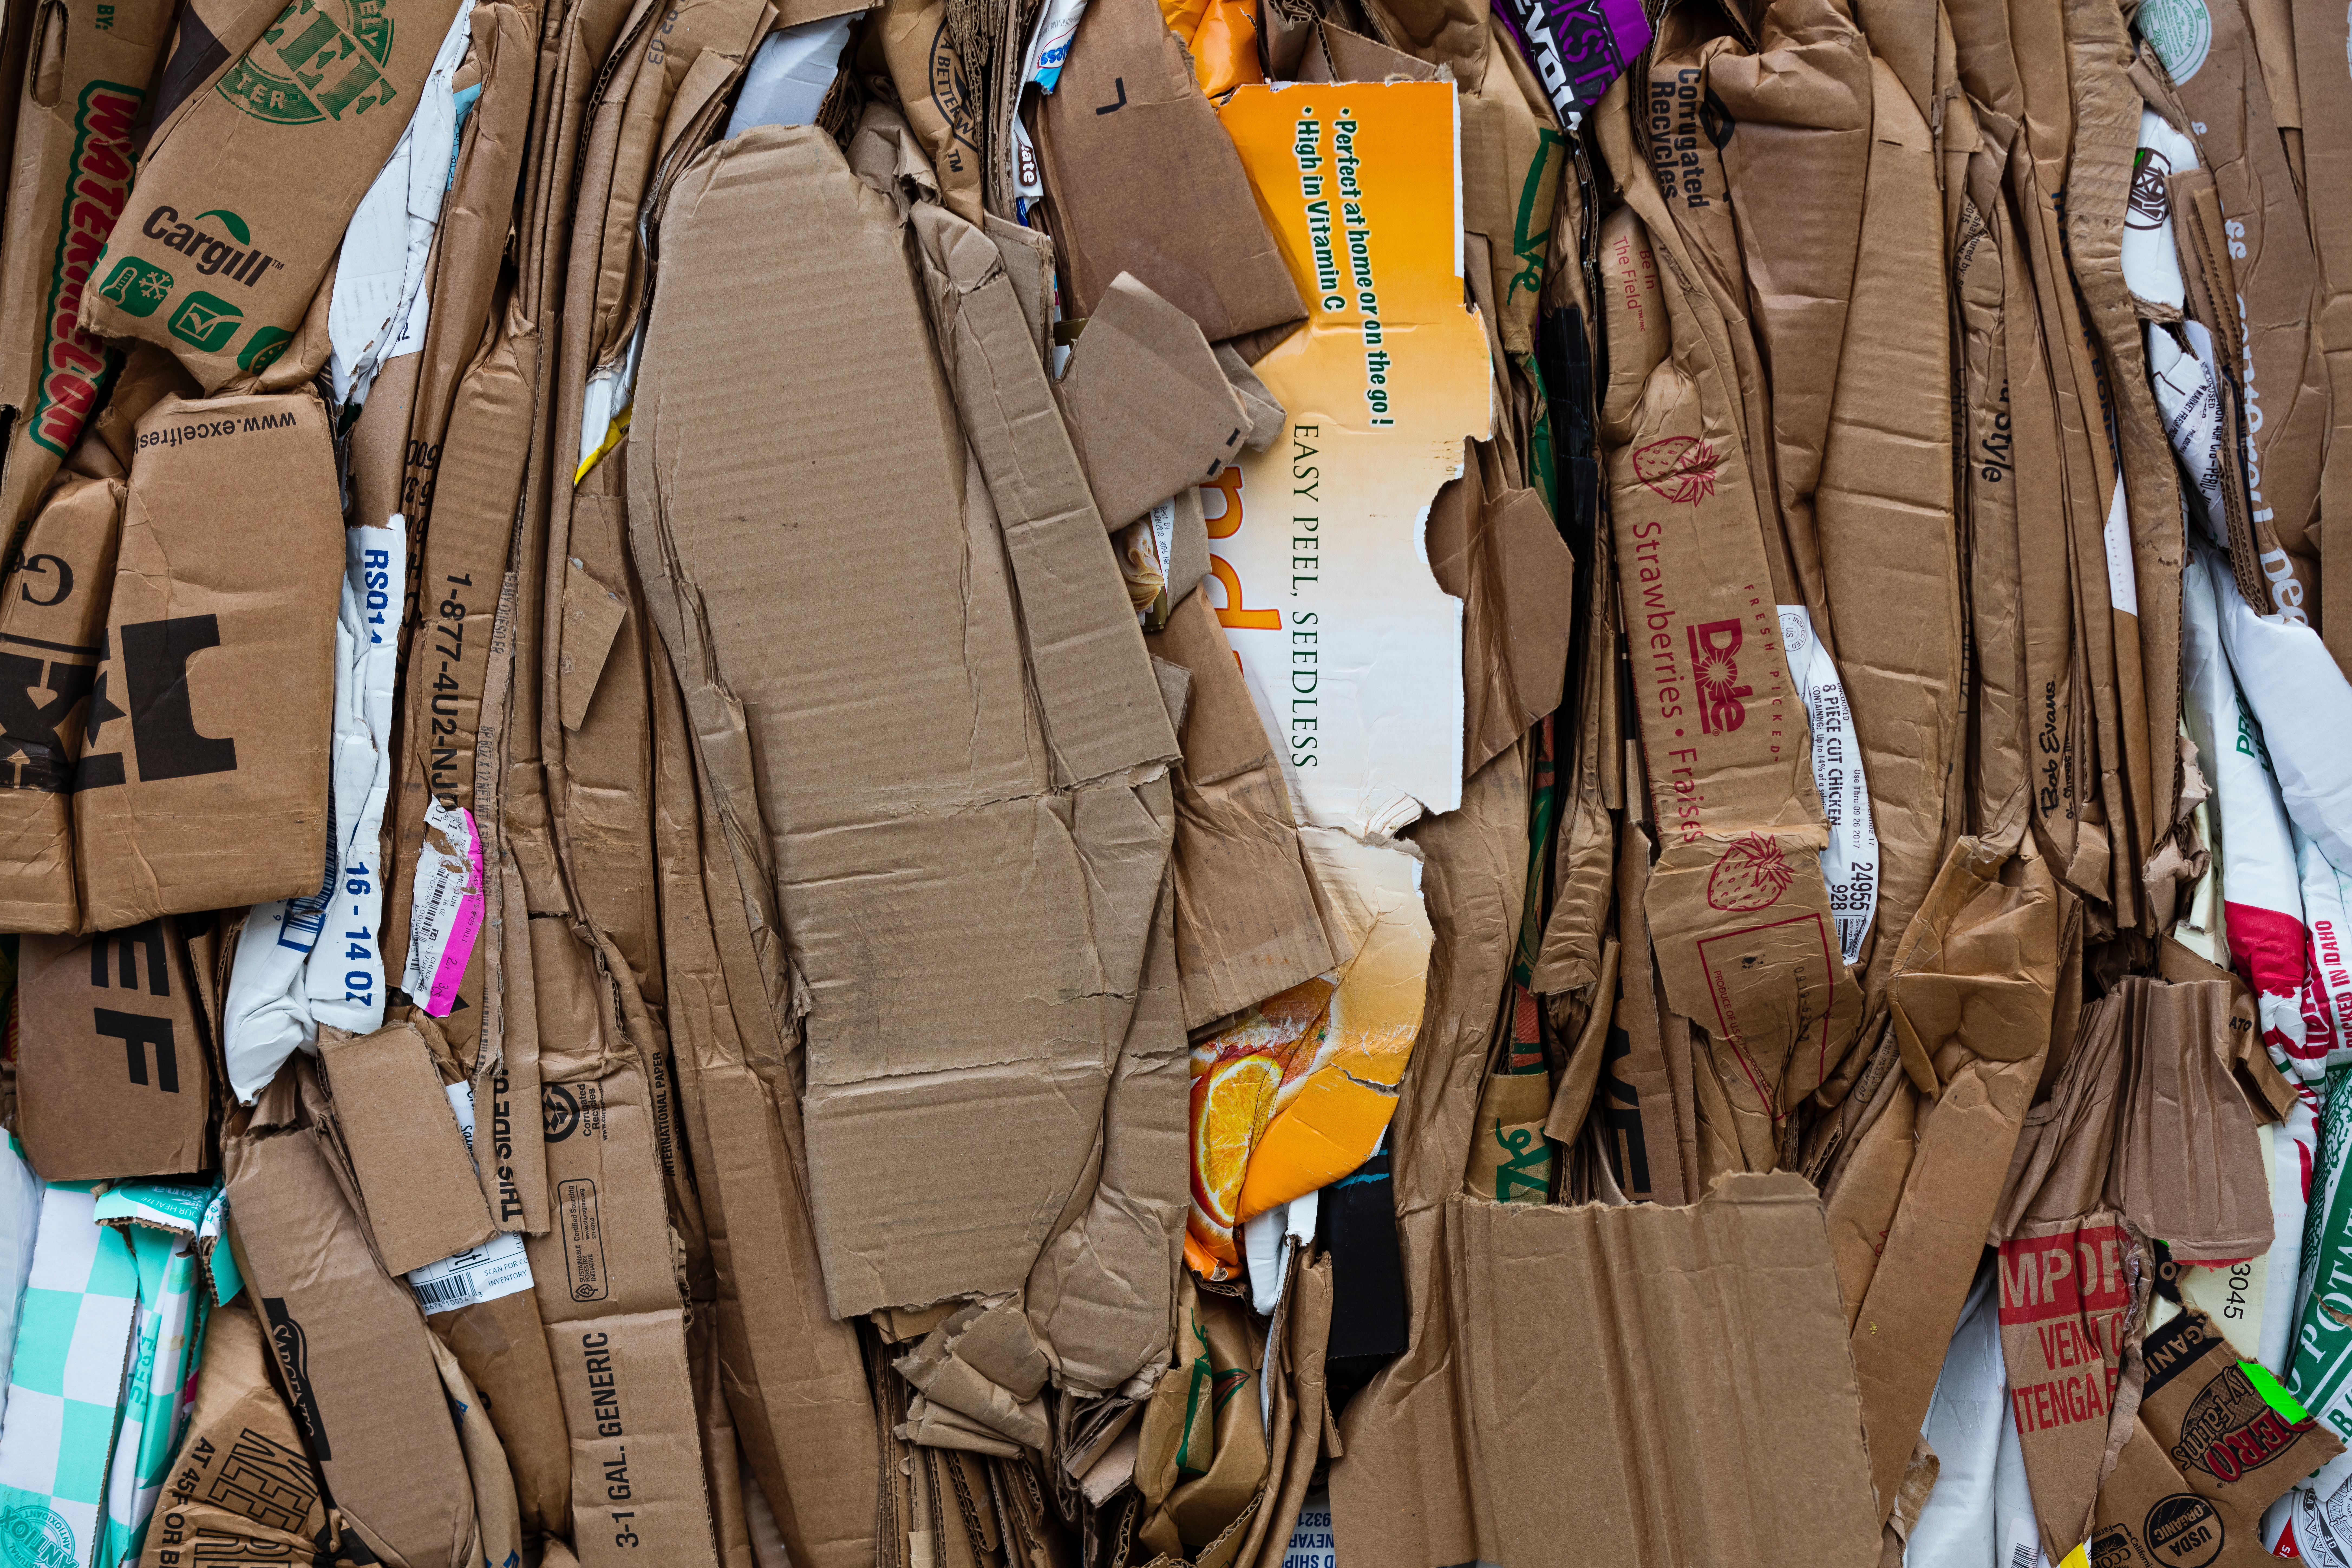 Sustainable packaging solutions require partnership between stakeholders across the supply chain.